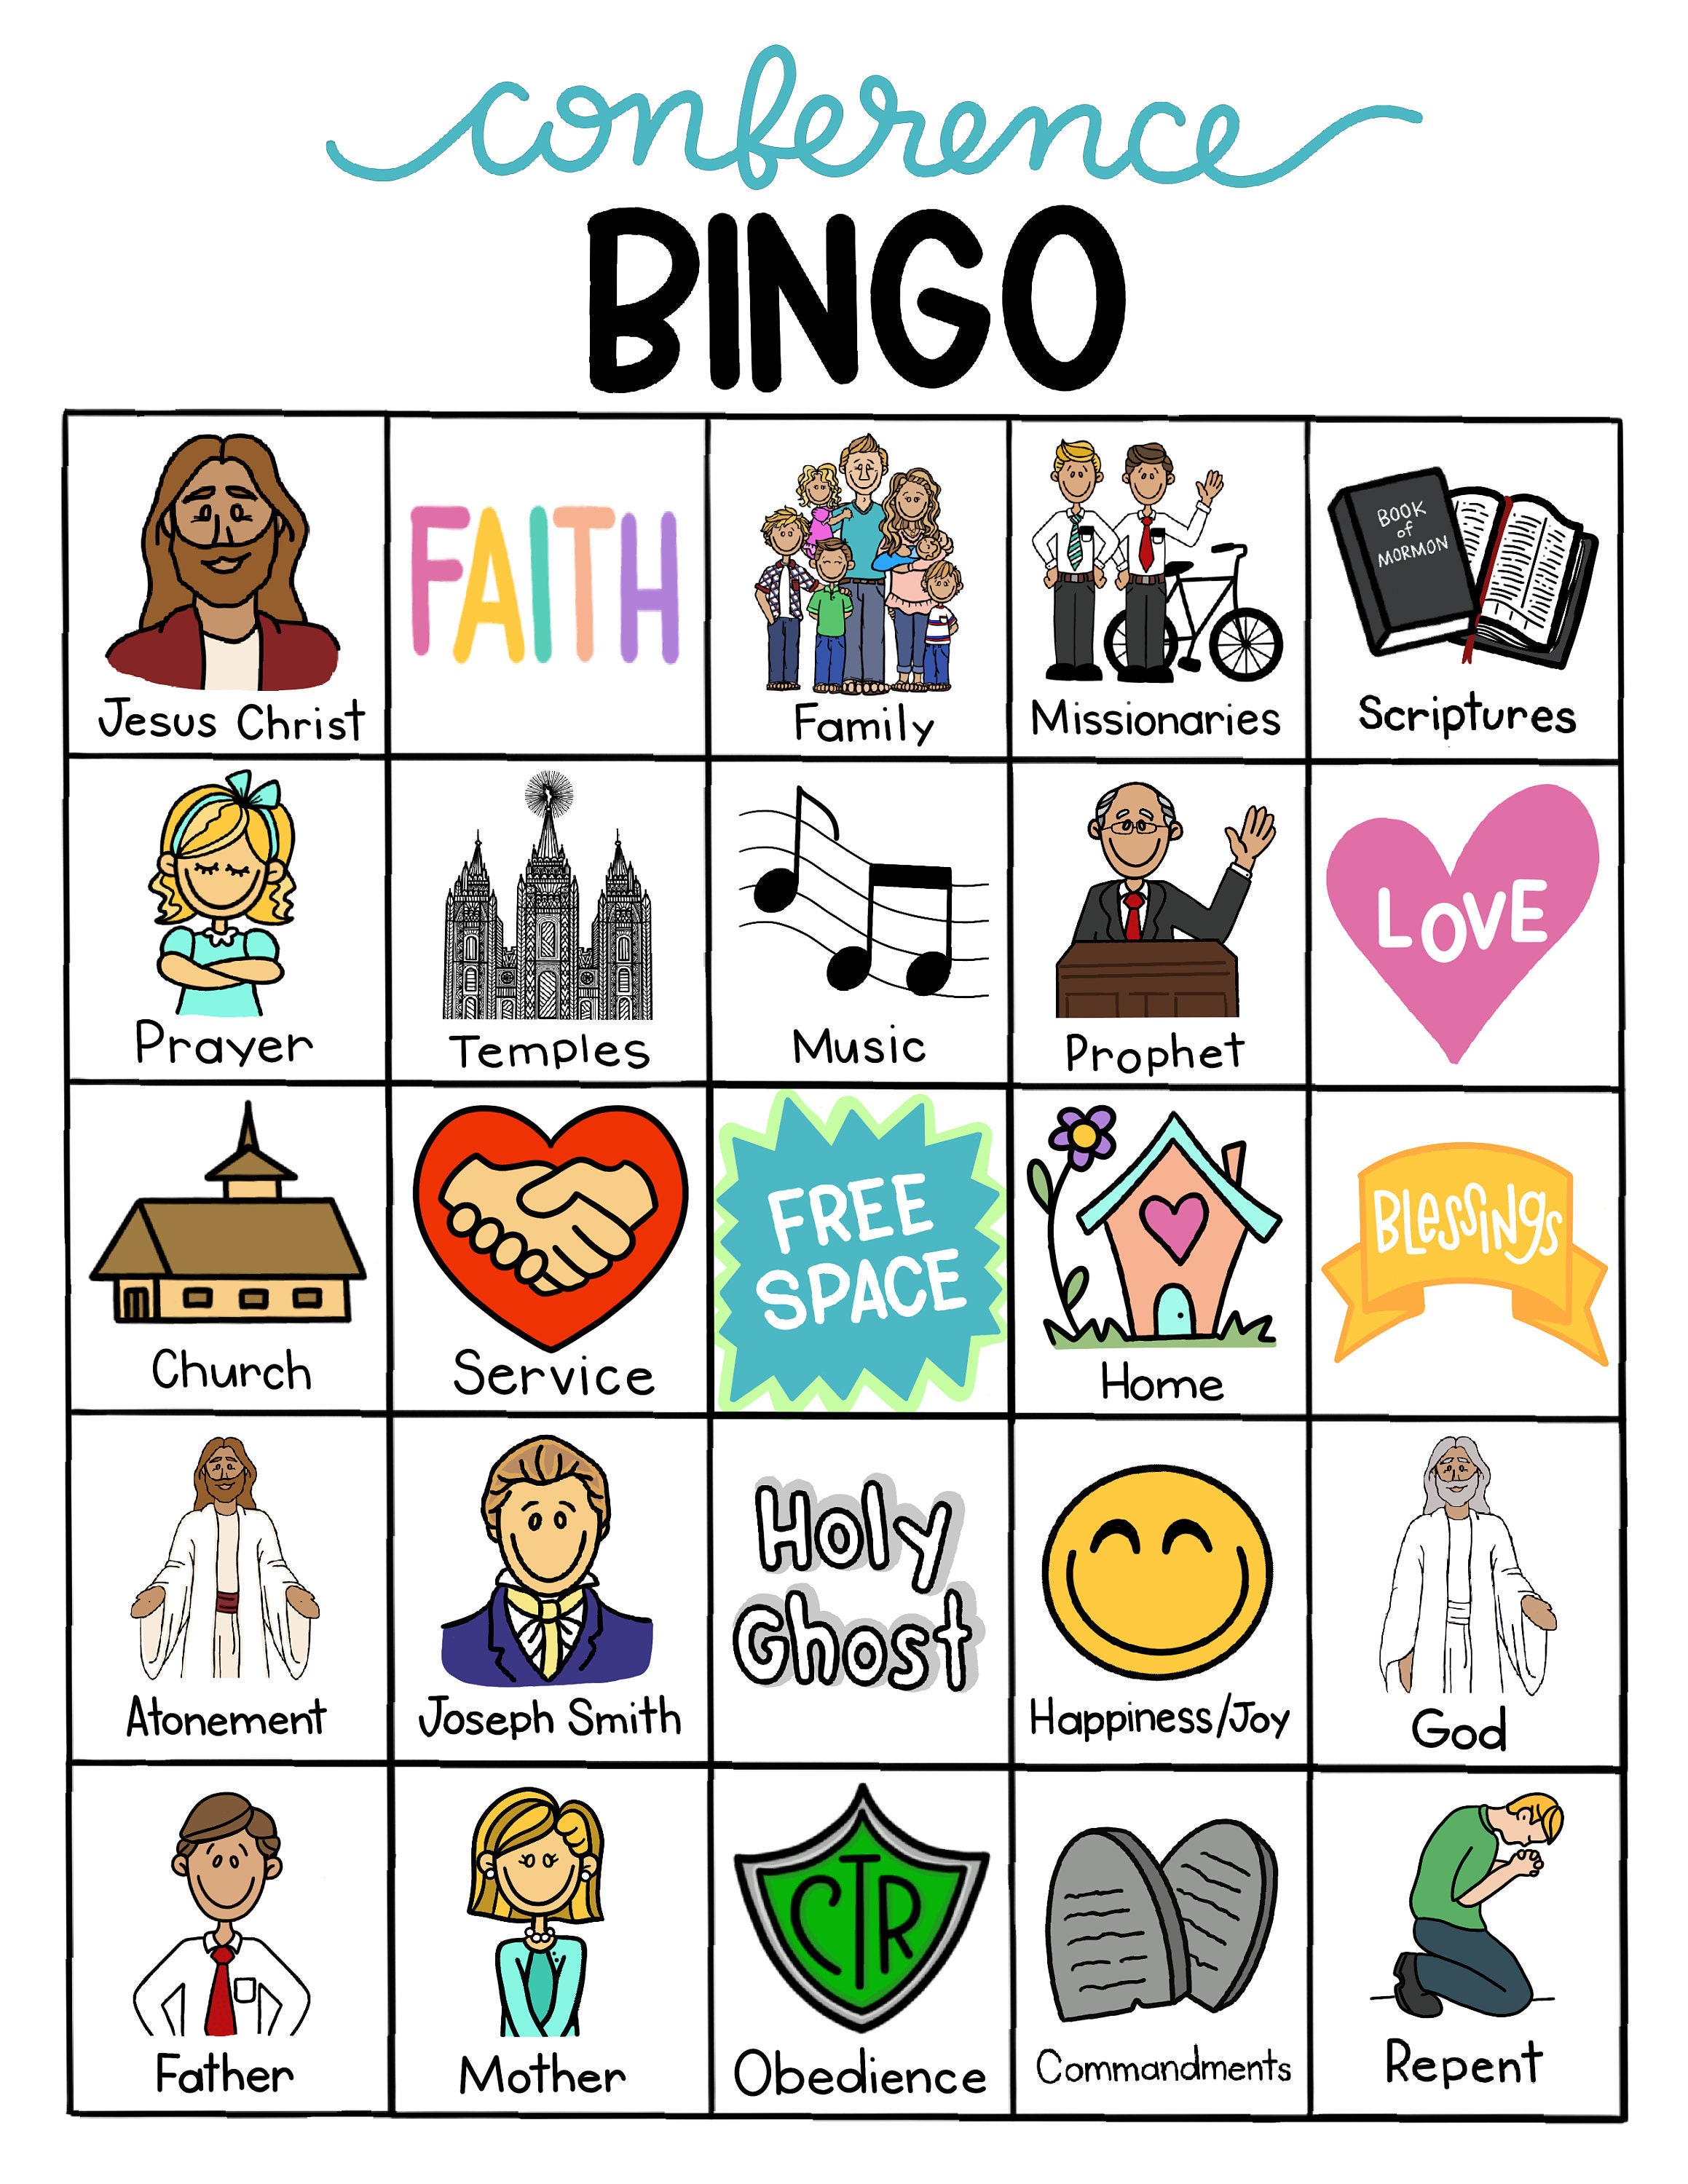 lds-church-general-conference-bingo-set-of-5-etsy